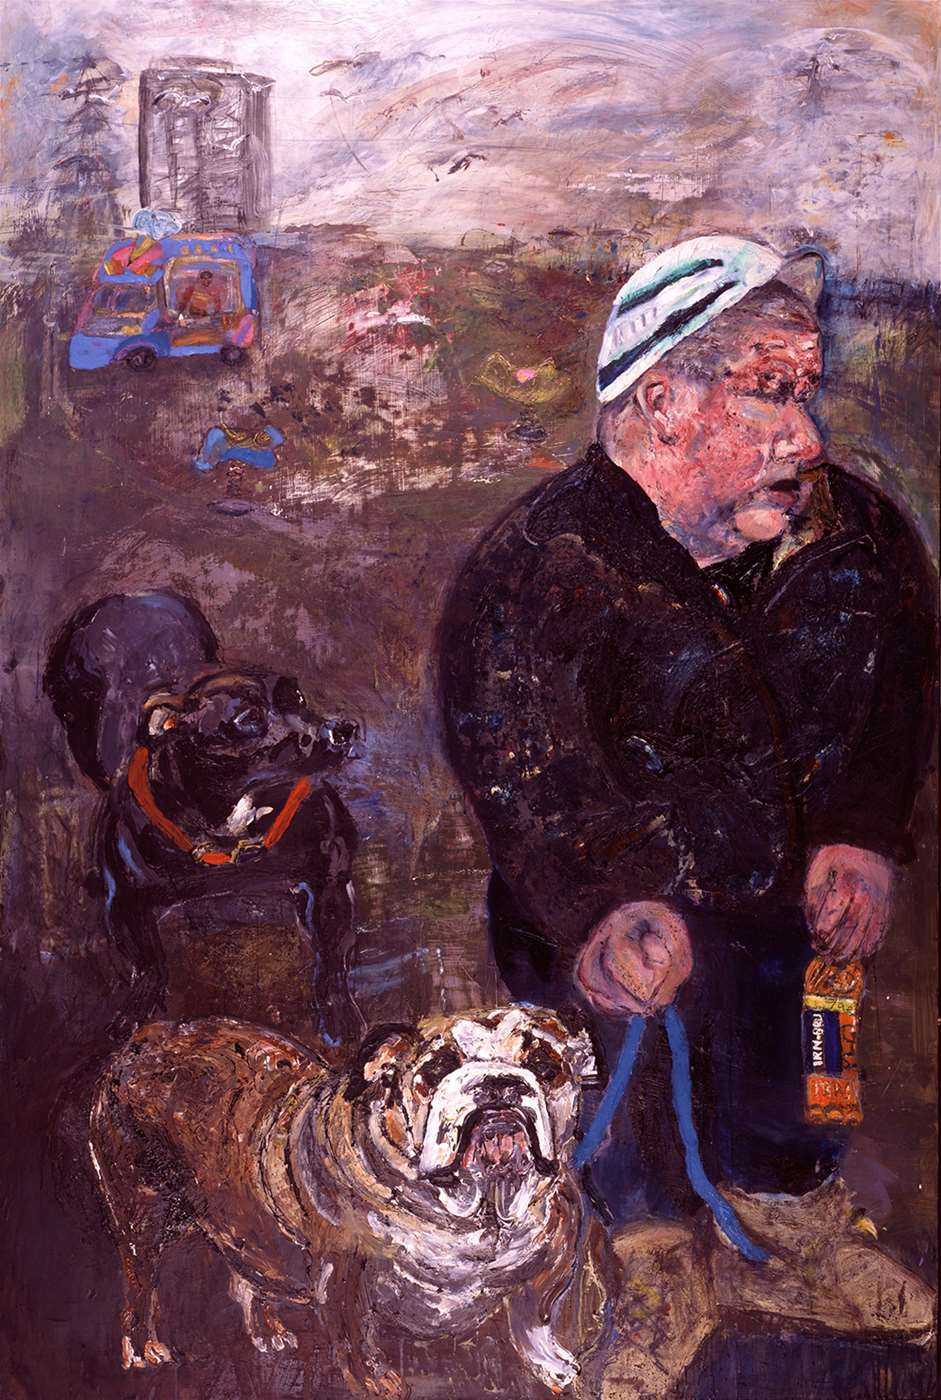 Buddha and Dogs - A painting by Scottish artist Katie Pope